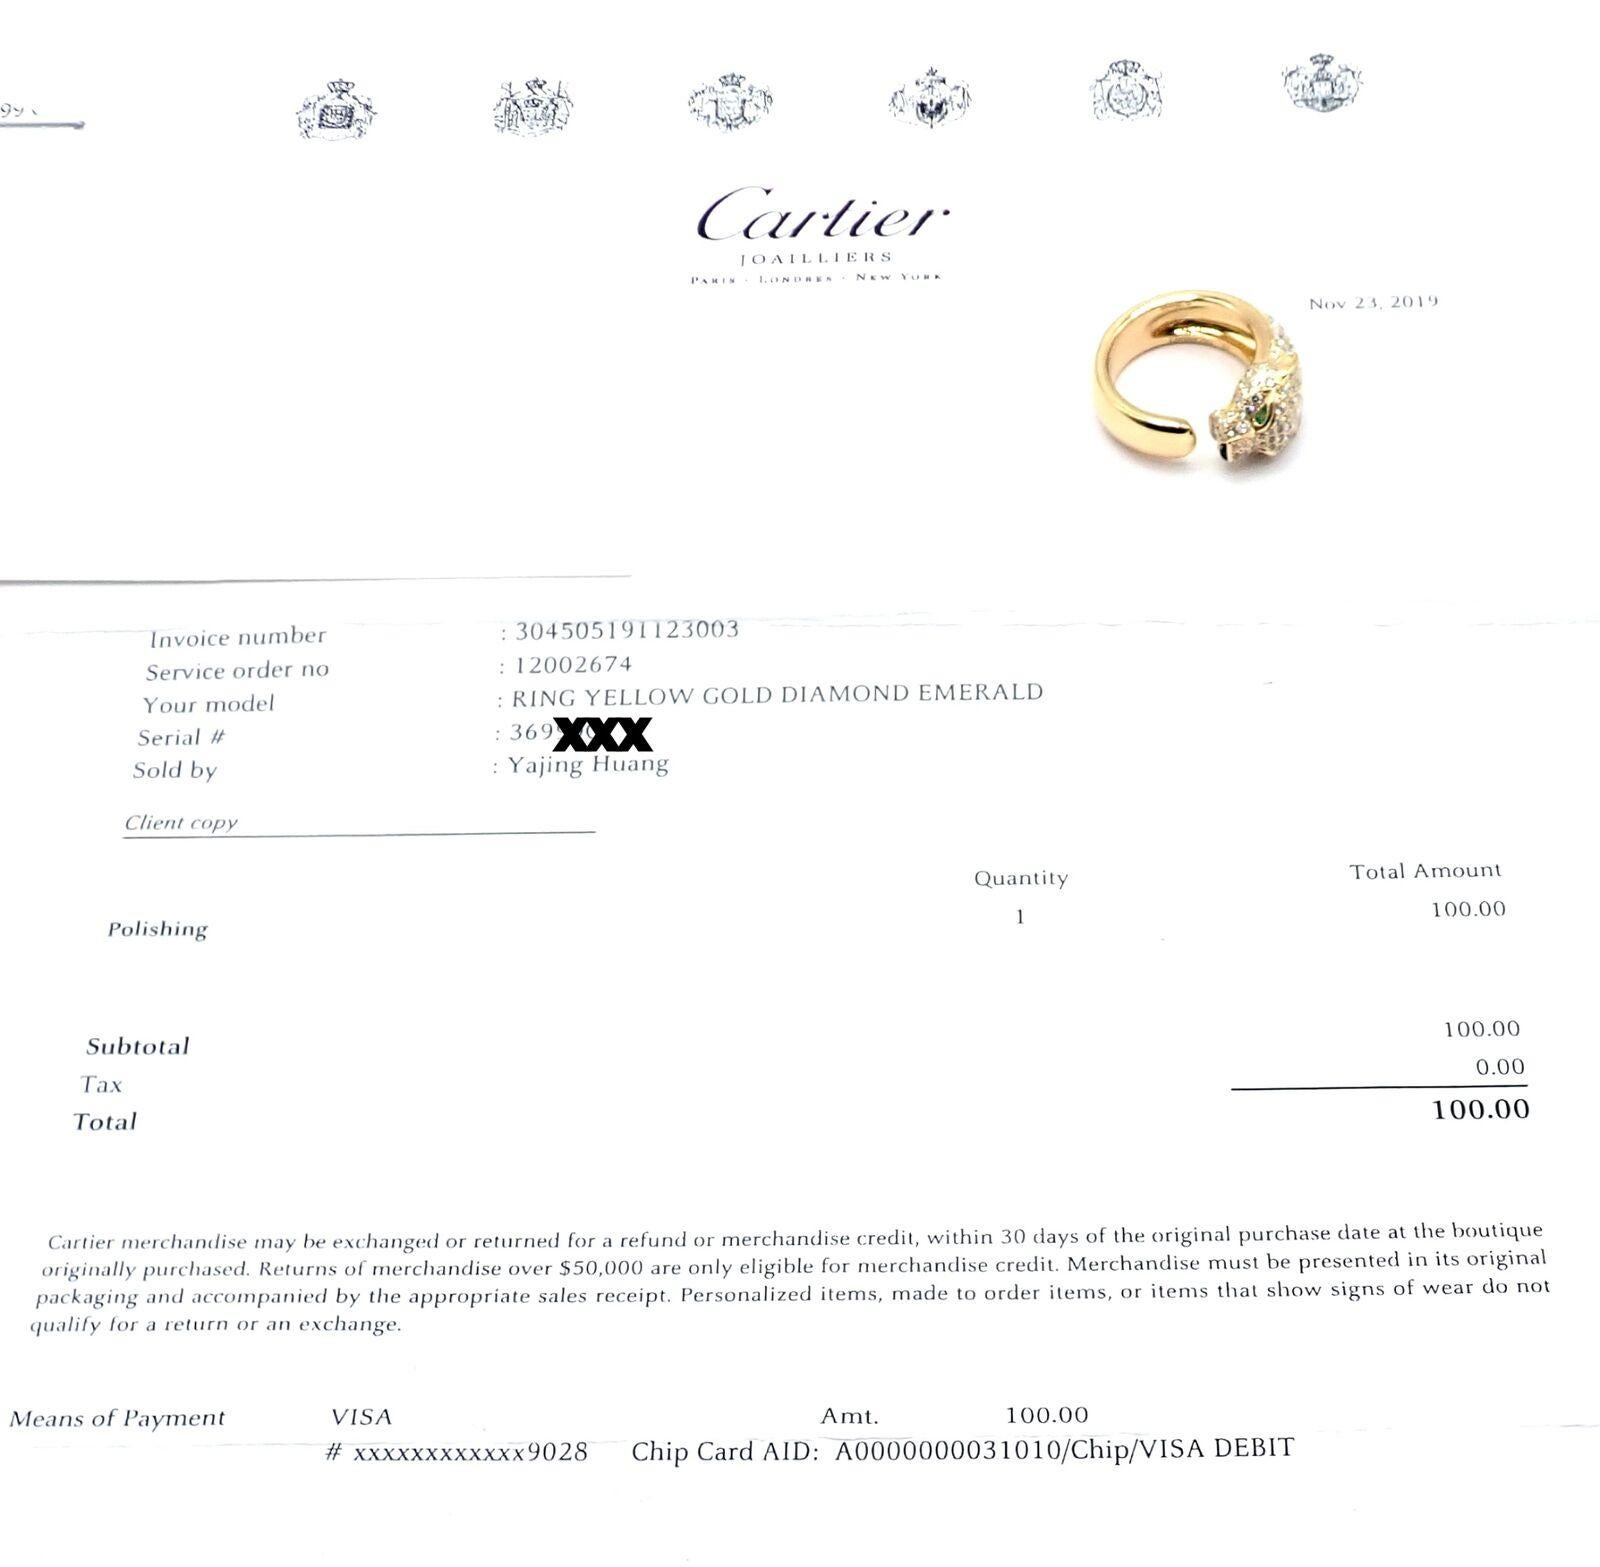 Cartier Goldring, Panther Panthere Smaragd Onyx Diamant im Angebot 4